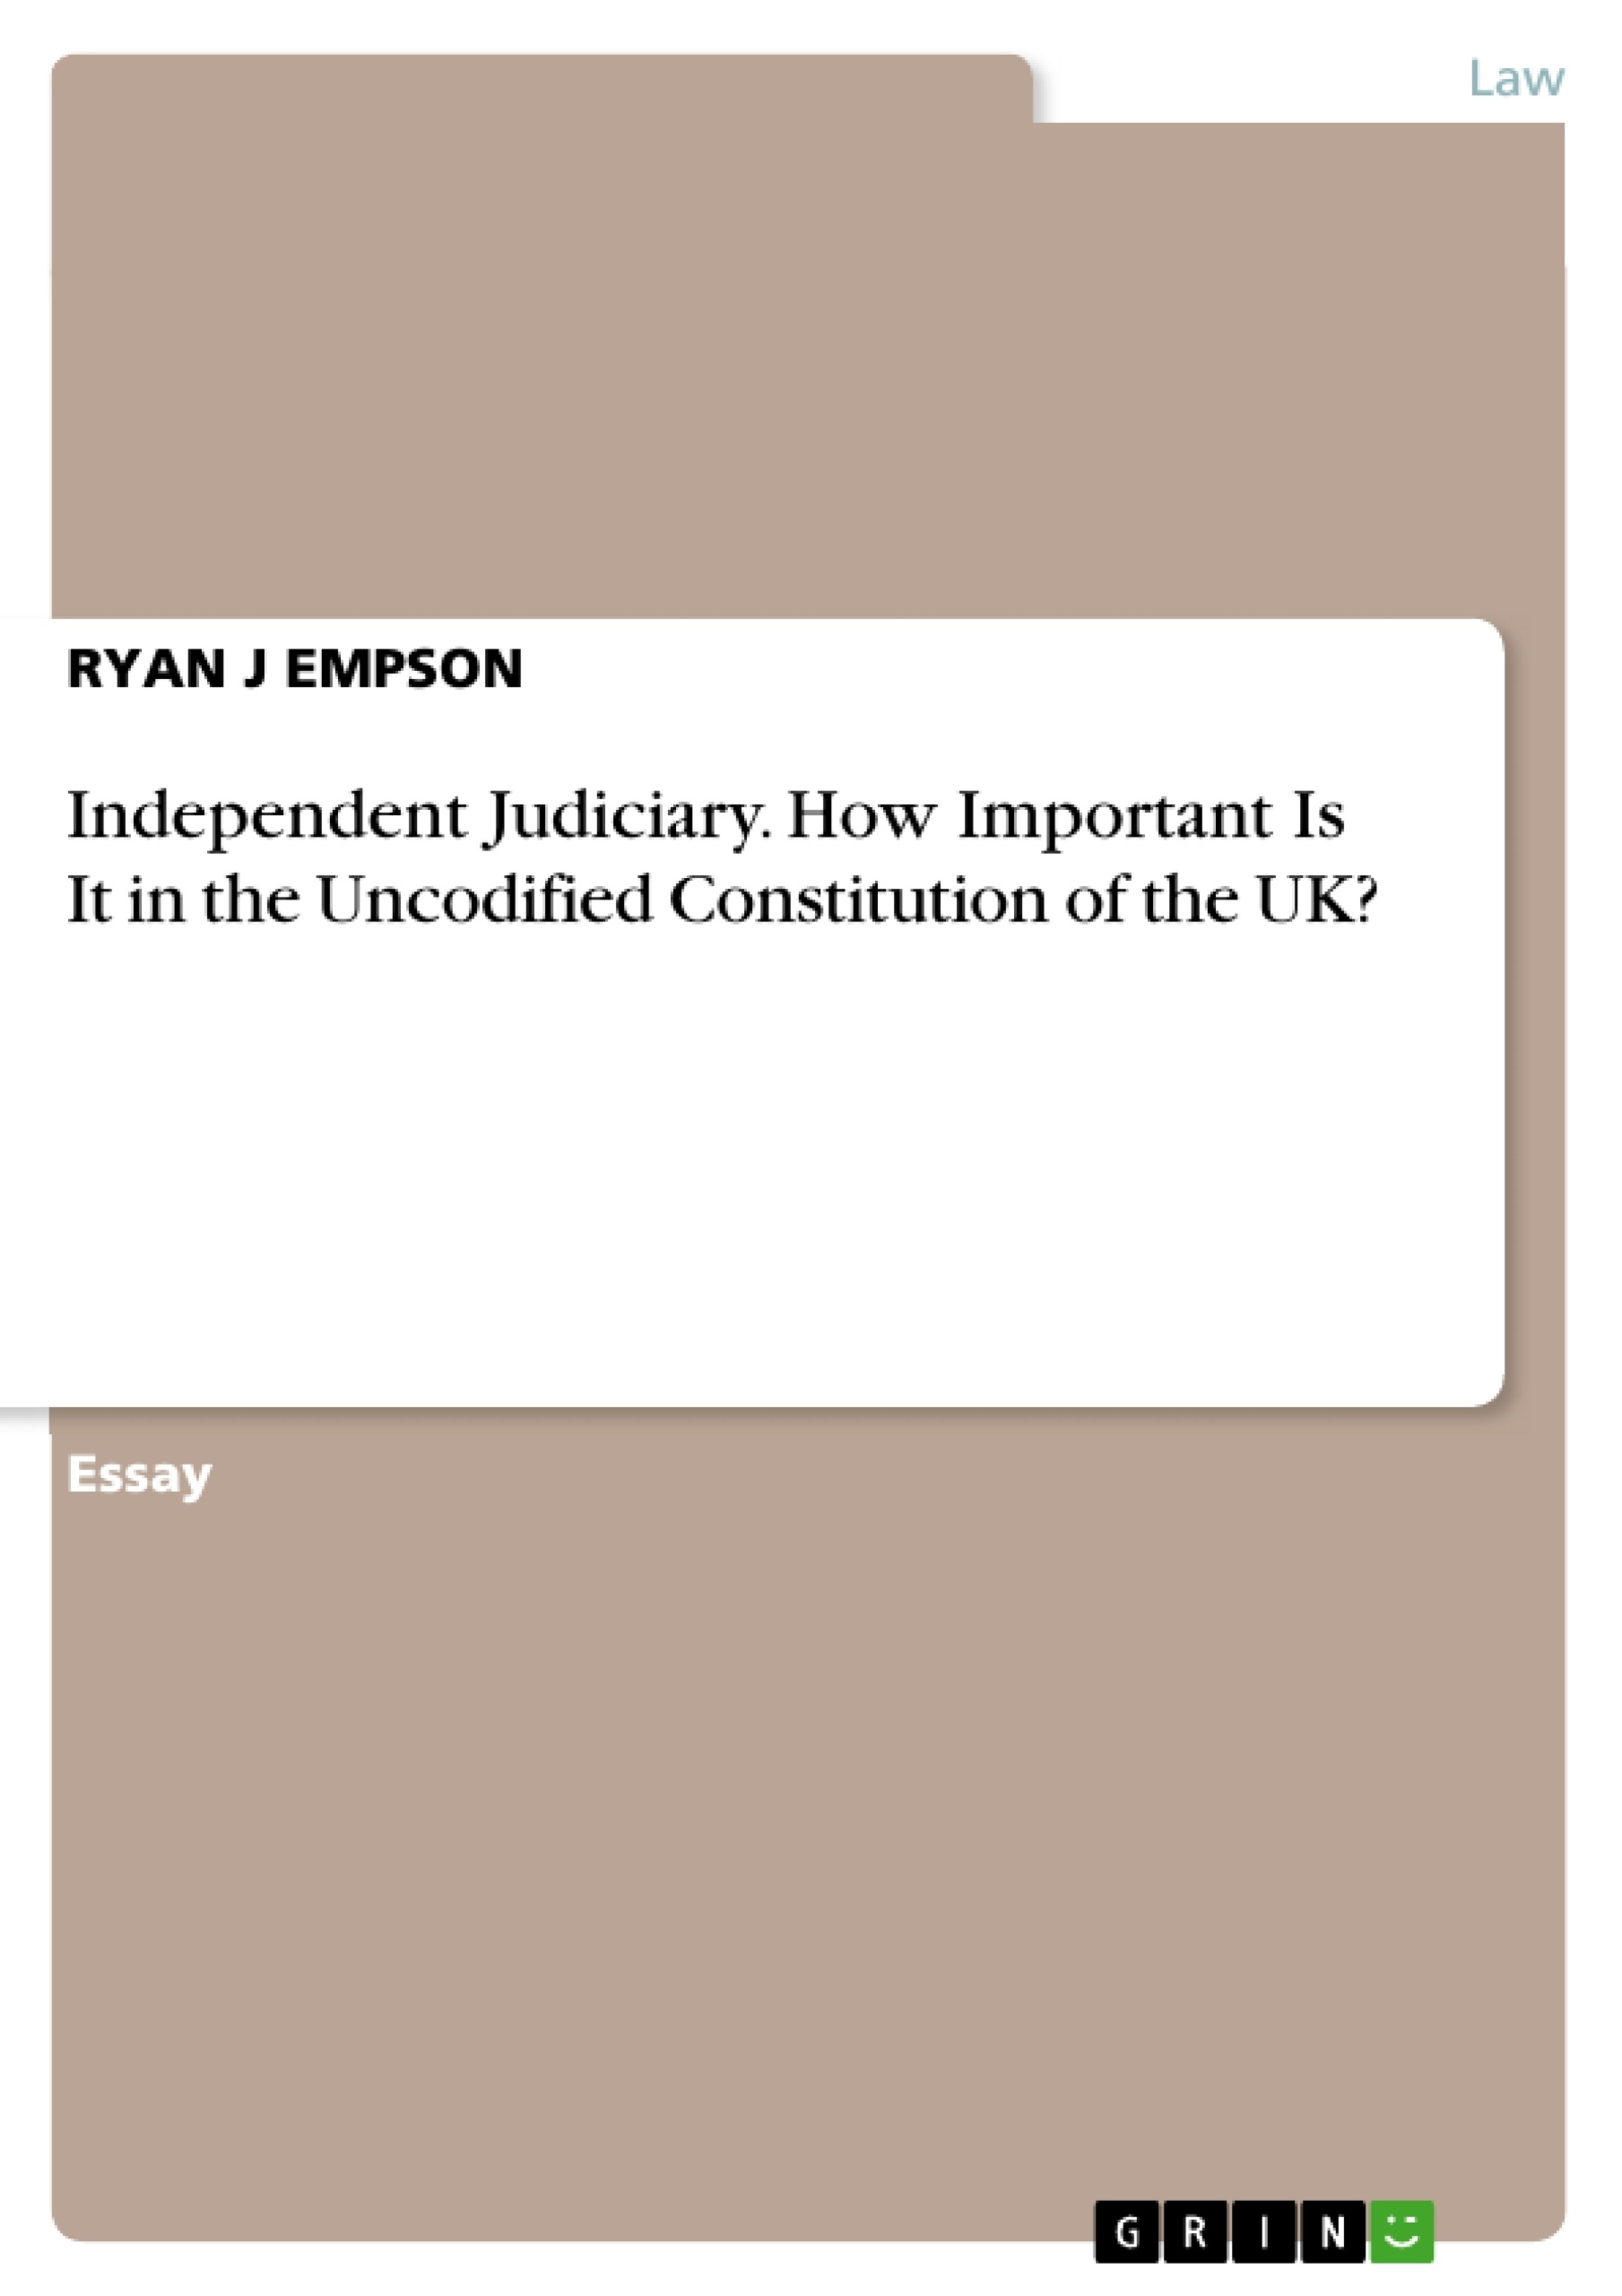 Titre: Independent Judiciary. How Important Is It in the Uncodified Constitution of the UK?